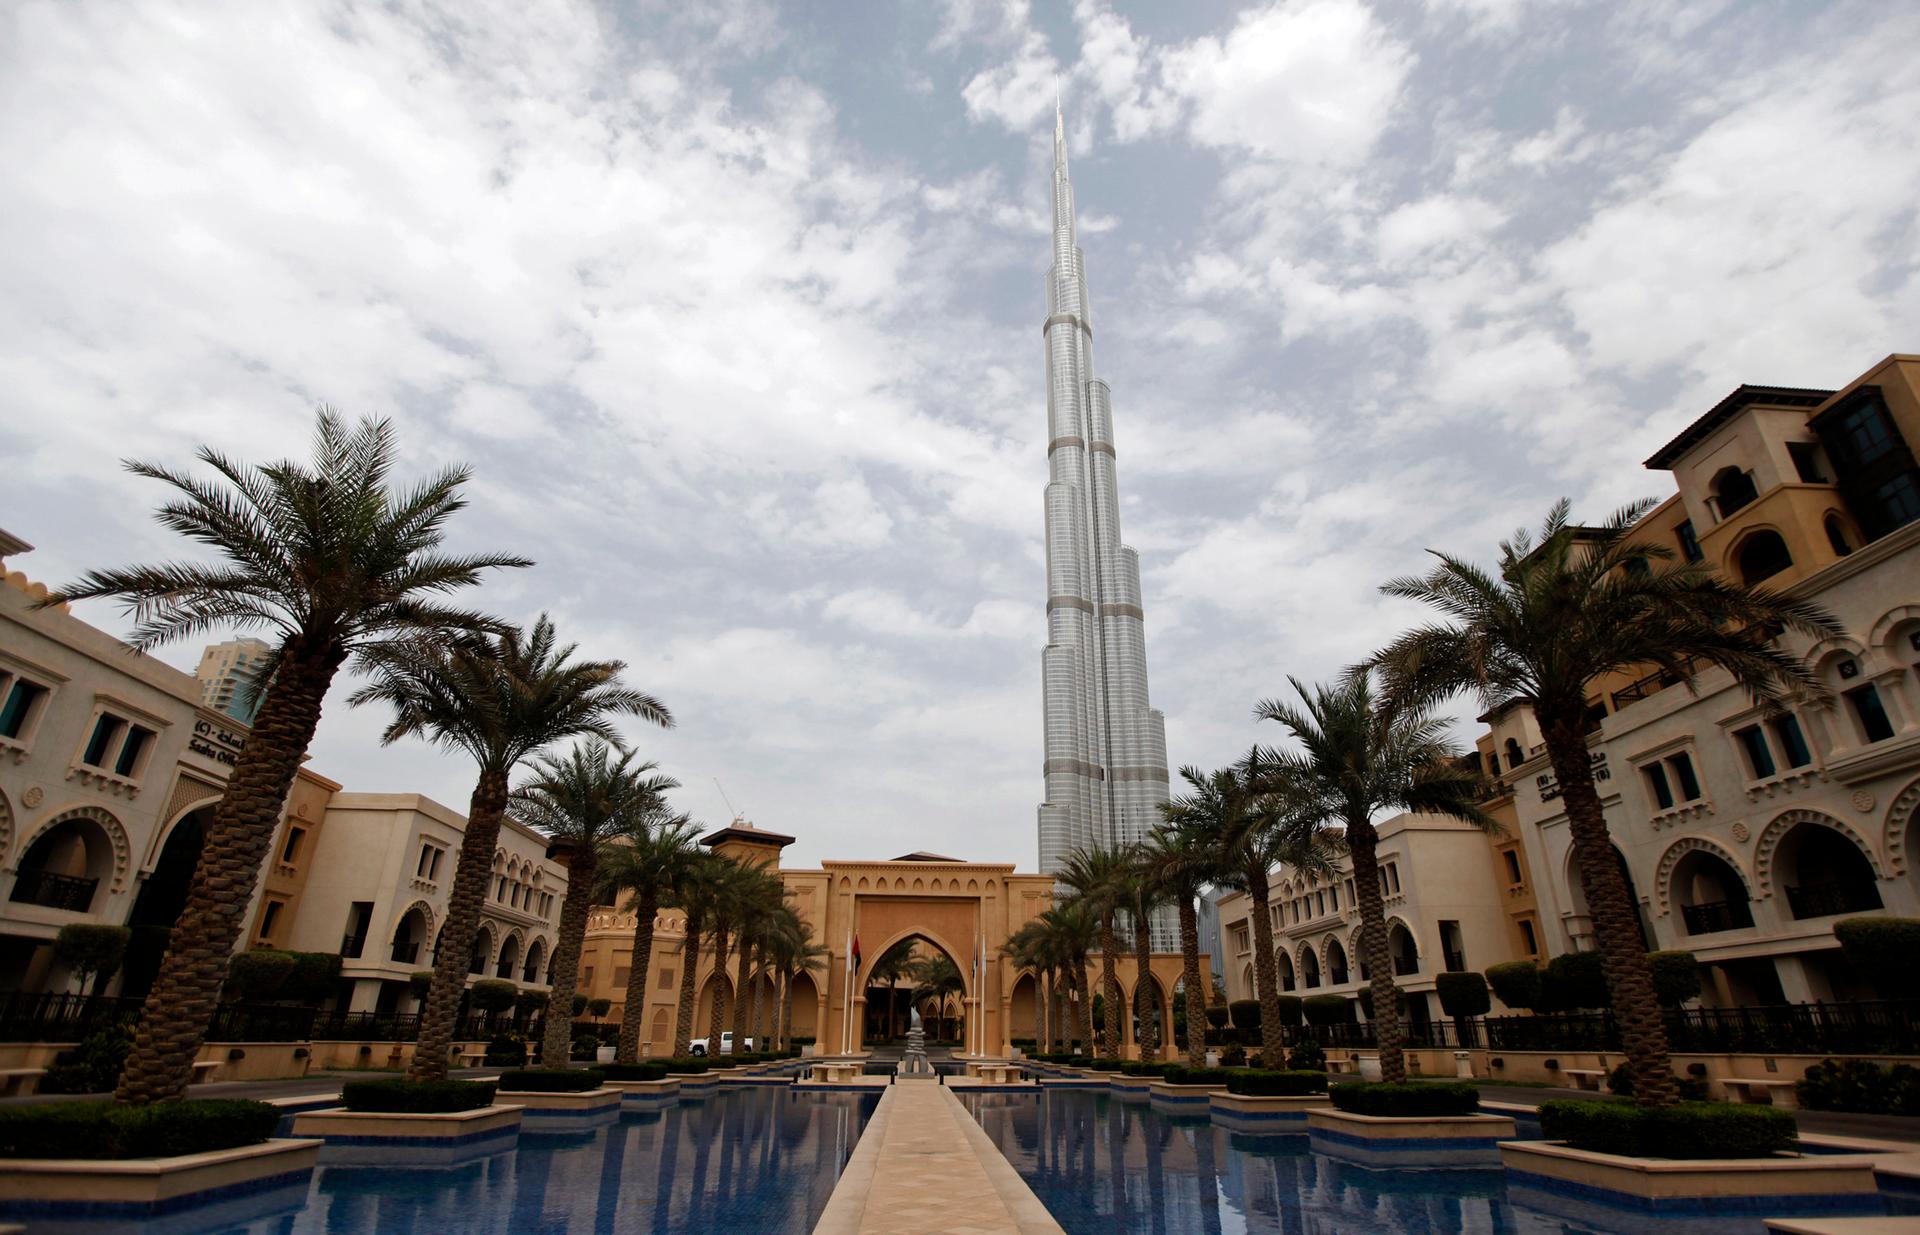 The United Arab Emirates has some of the world's tallest and most expensive buildings, including the Burj Khalifa (pictured). But does such luxury bring happiness? 